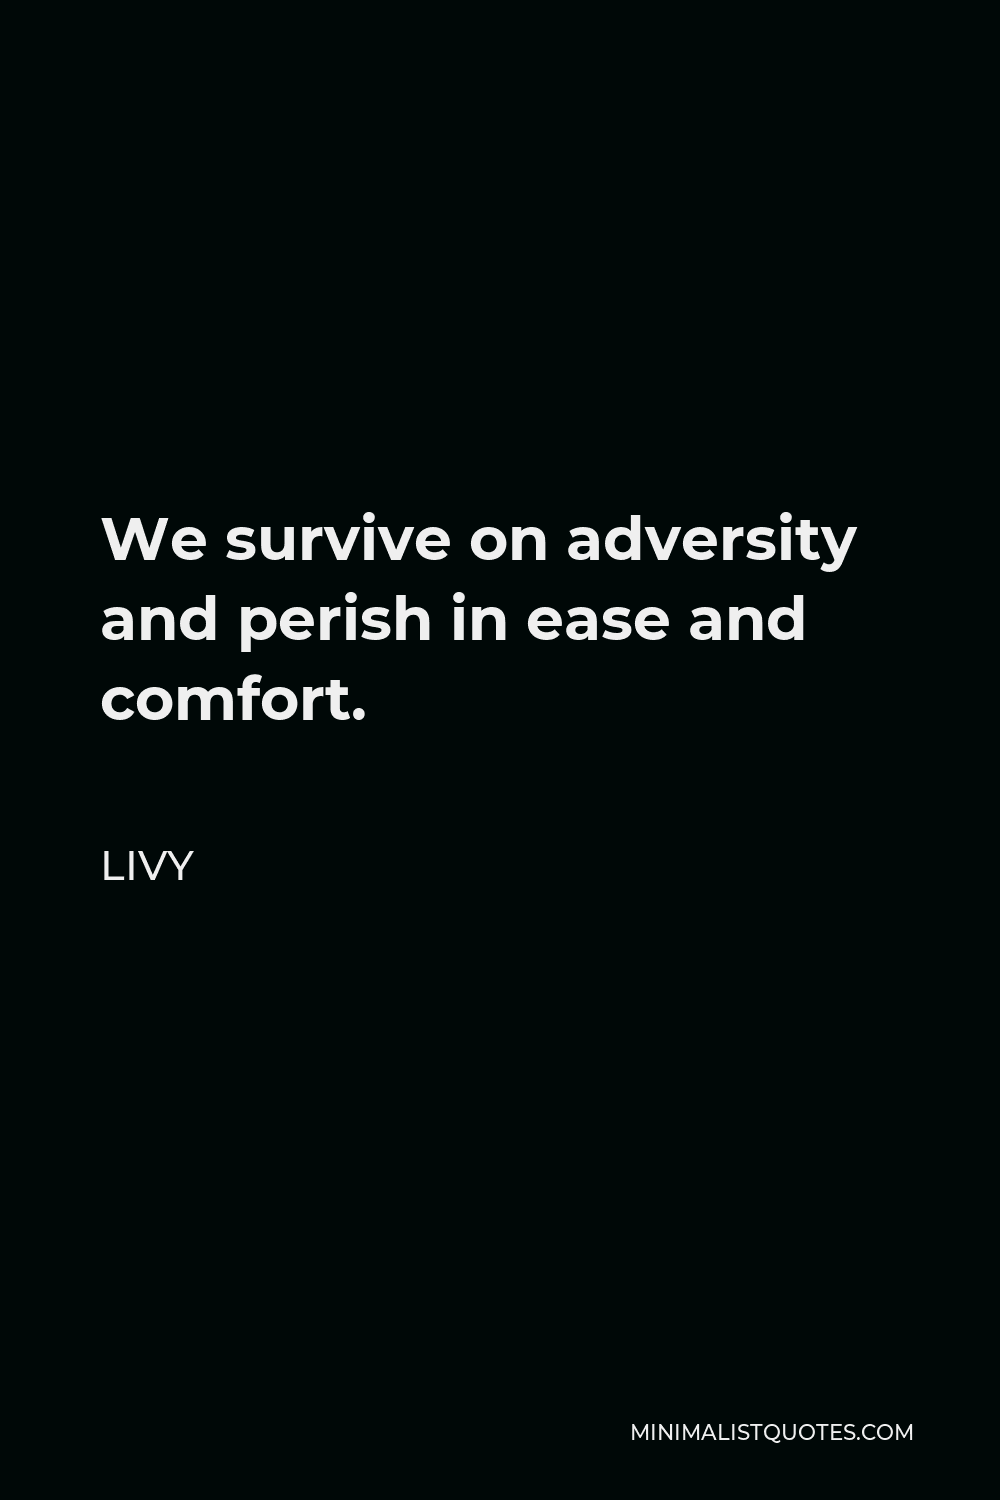 Livy Quote - We survive on adversity and perish in ease and comfort.